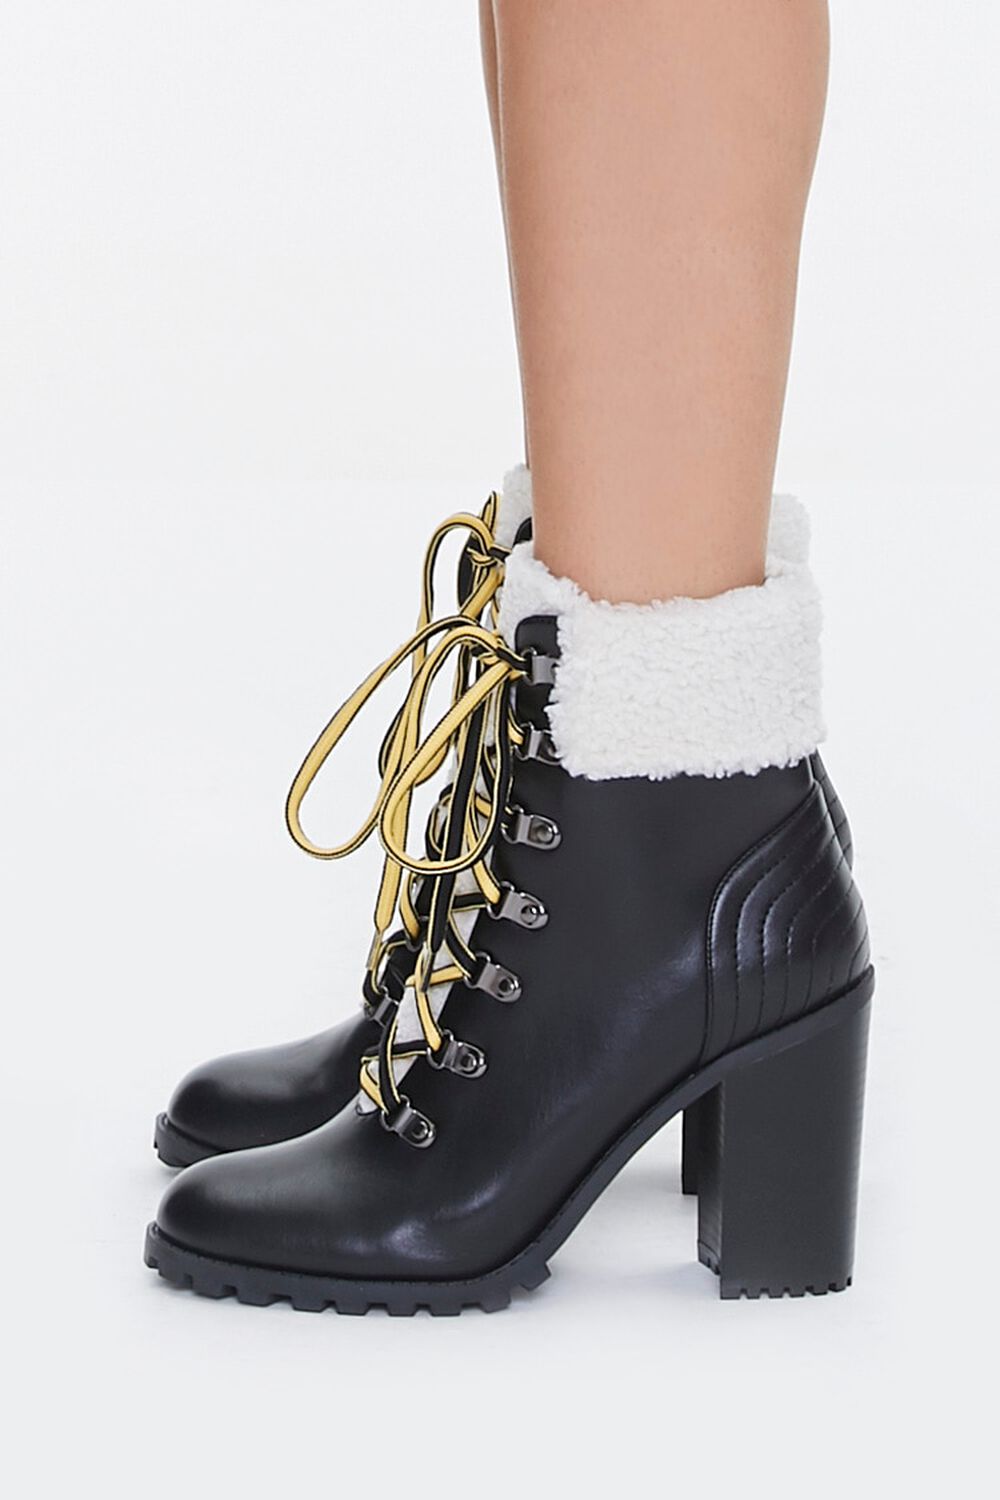 BLACK Faux Leather & Faux Shearling Ankle Boots, image 2